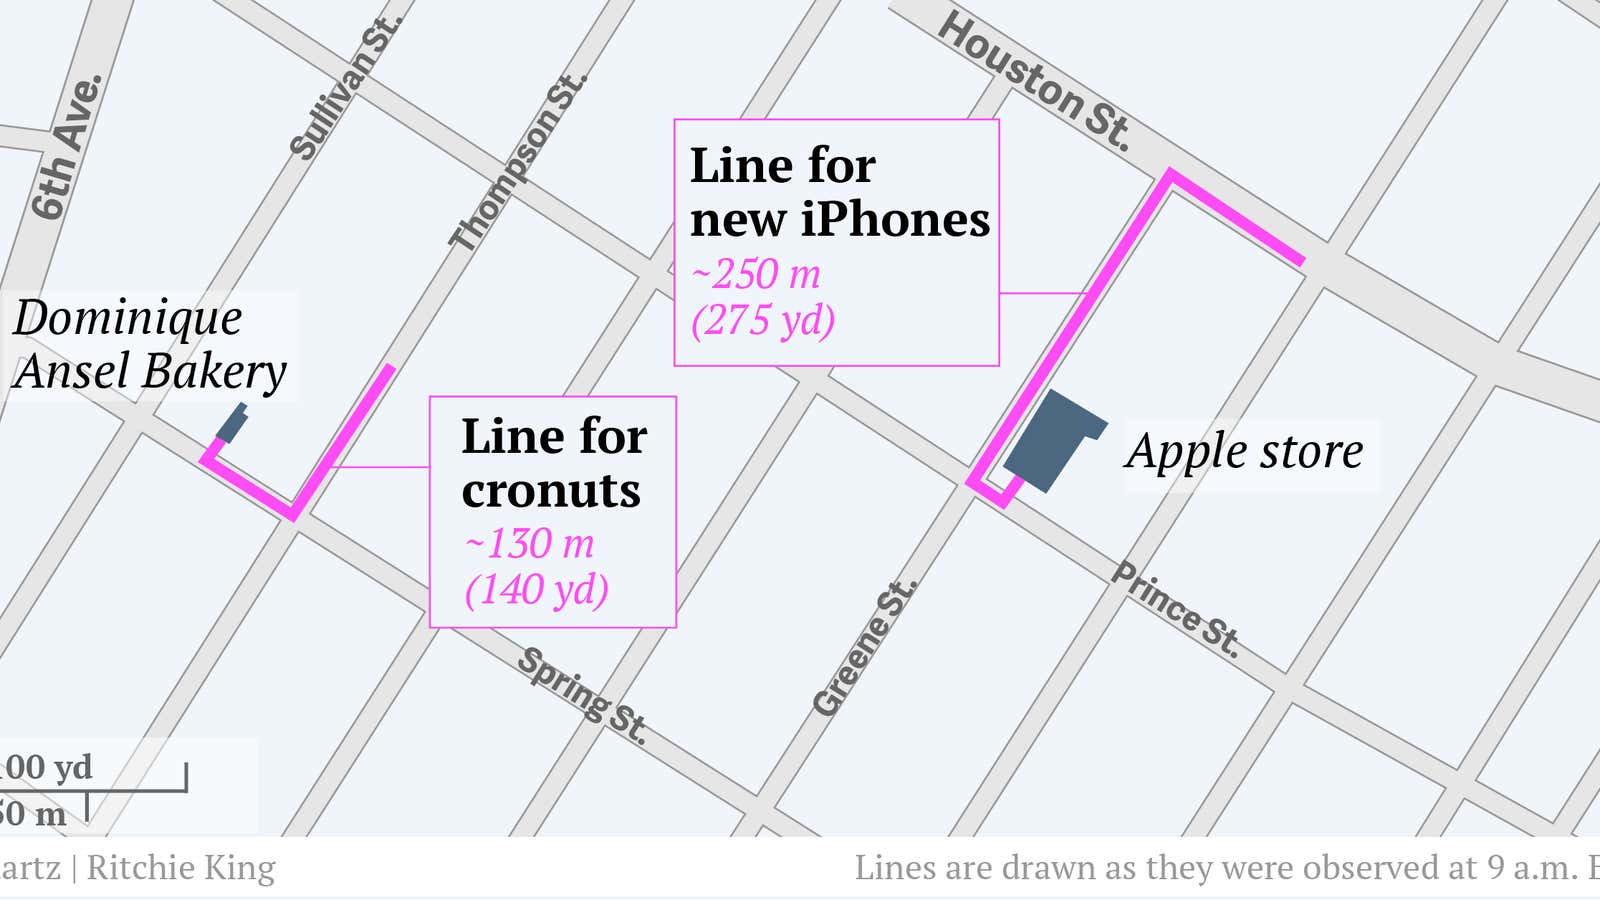 The line for new iPhones vs. the line for cronuts